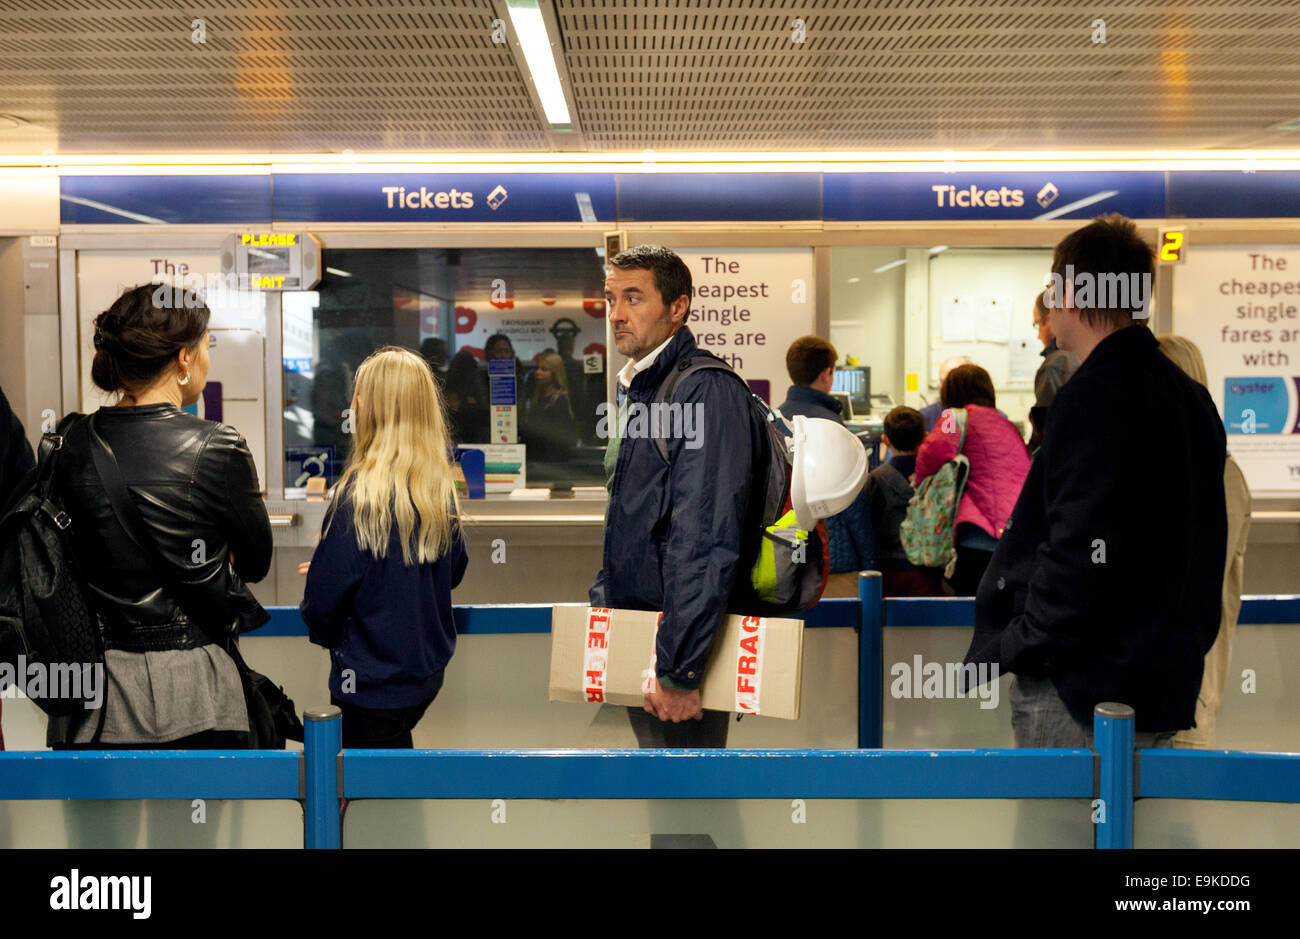 People waiting in a ticket queue on the London Underground, Kings Cross underqround station, London UK Stock Photo